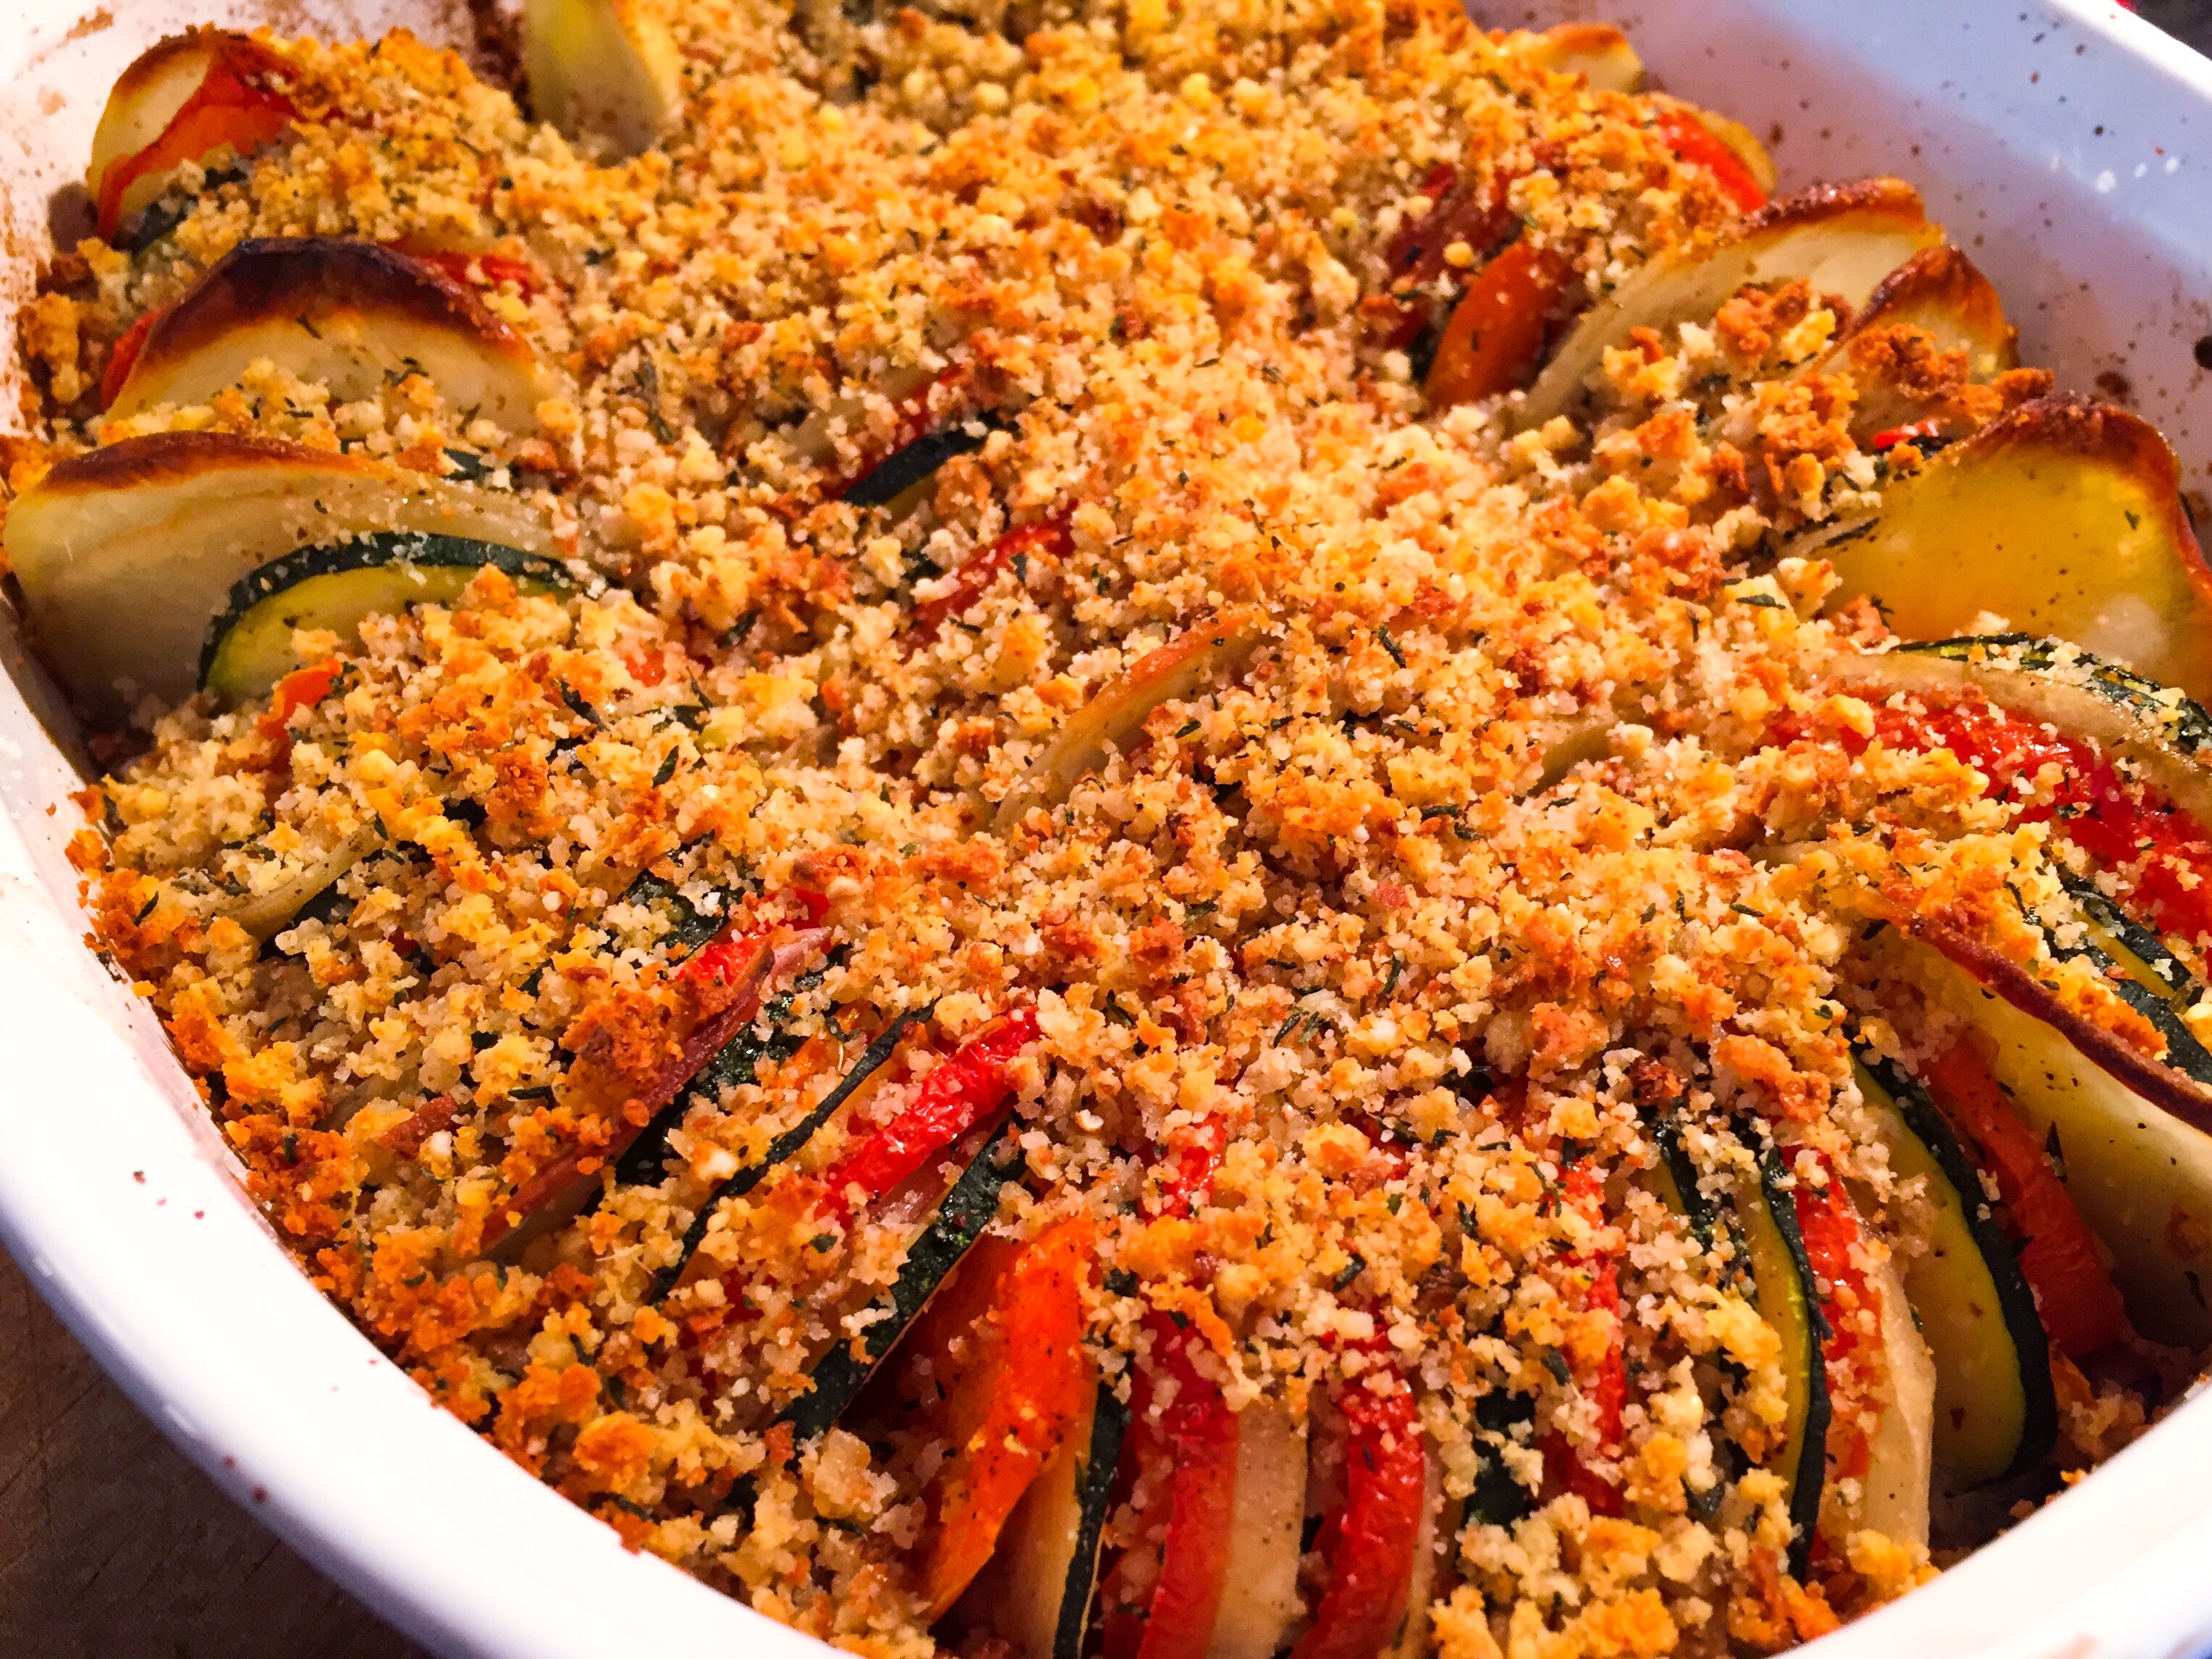 Delicious roasted vegetable tian with an herbed gluten free bread crumb topping